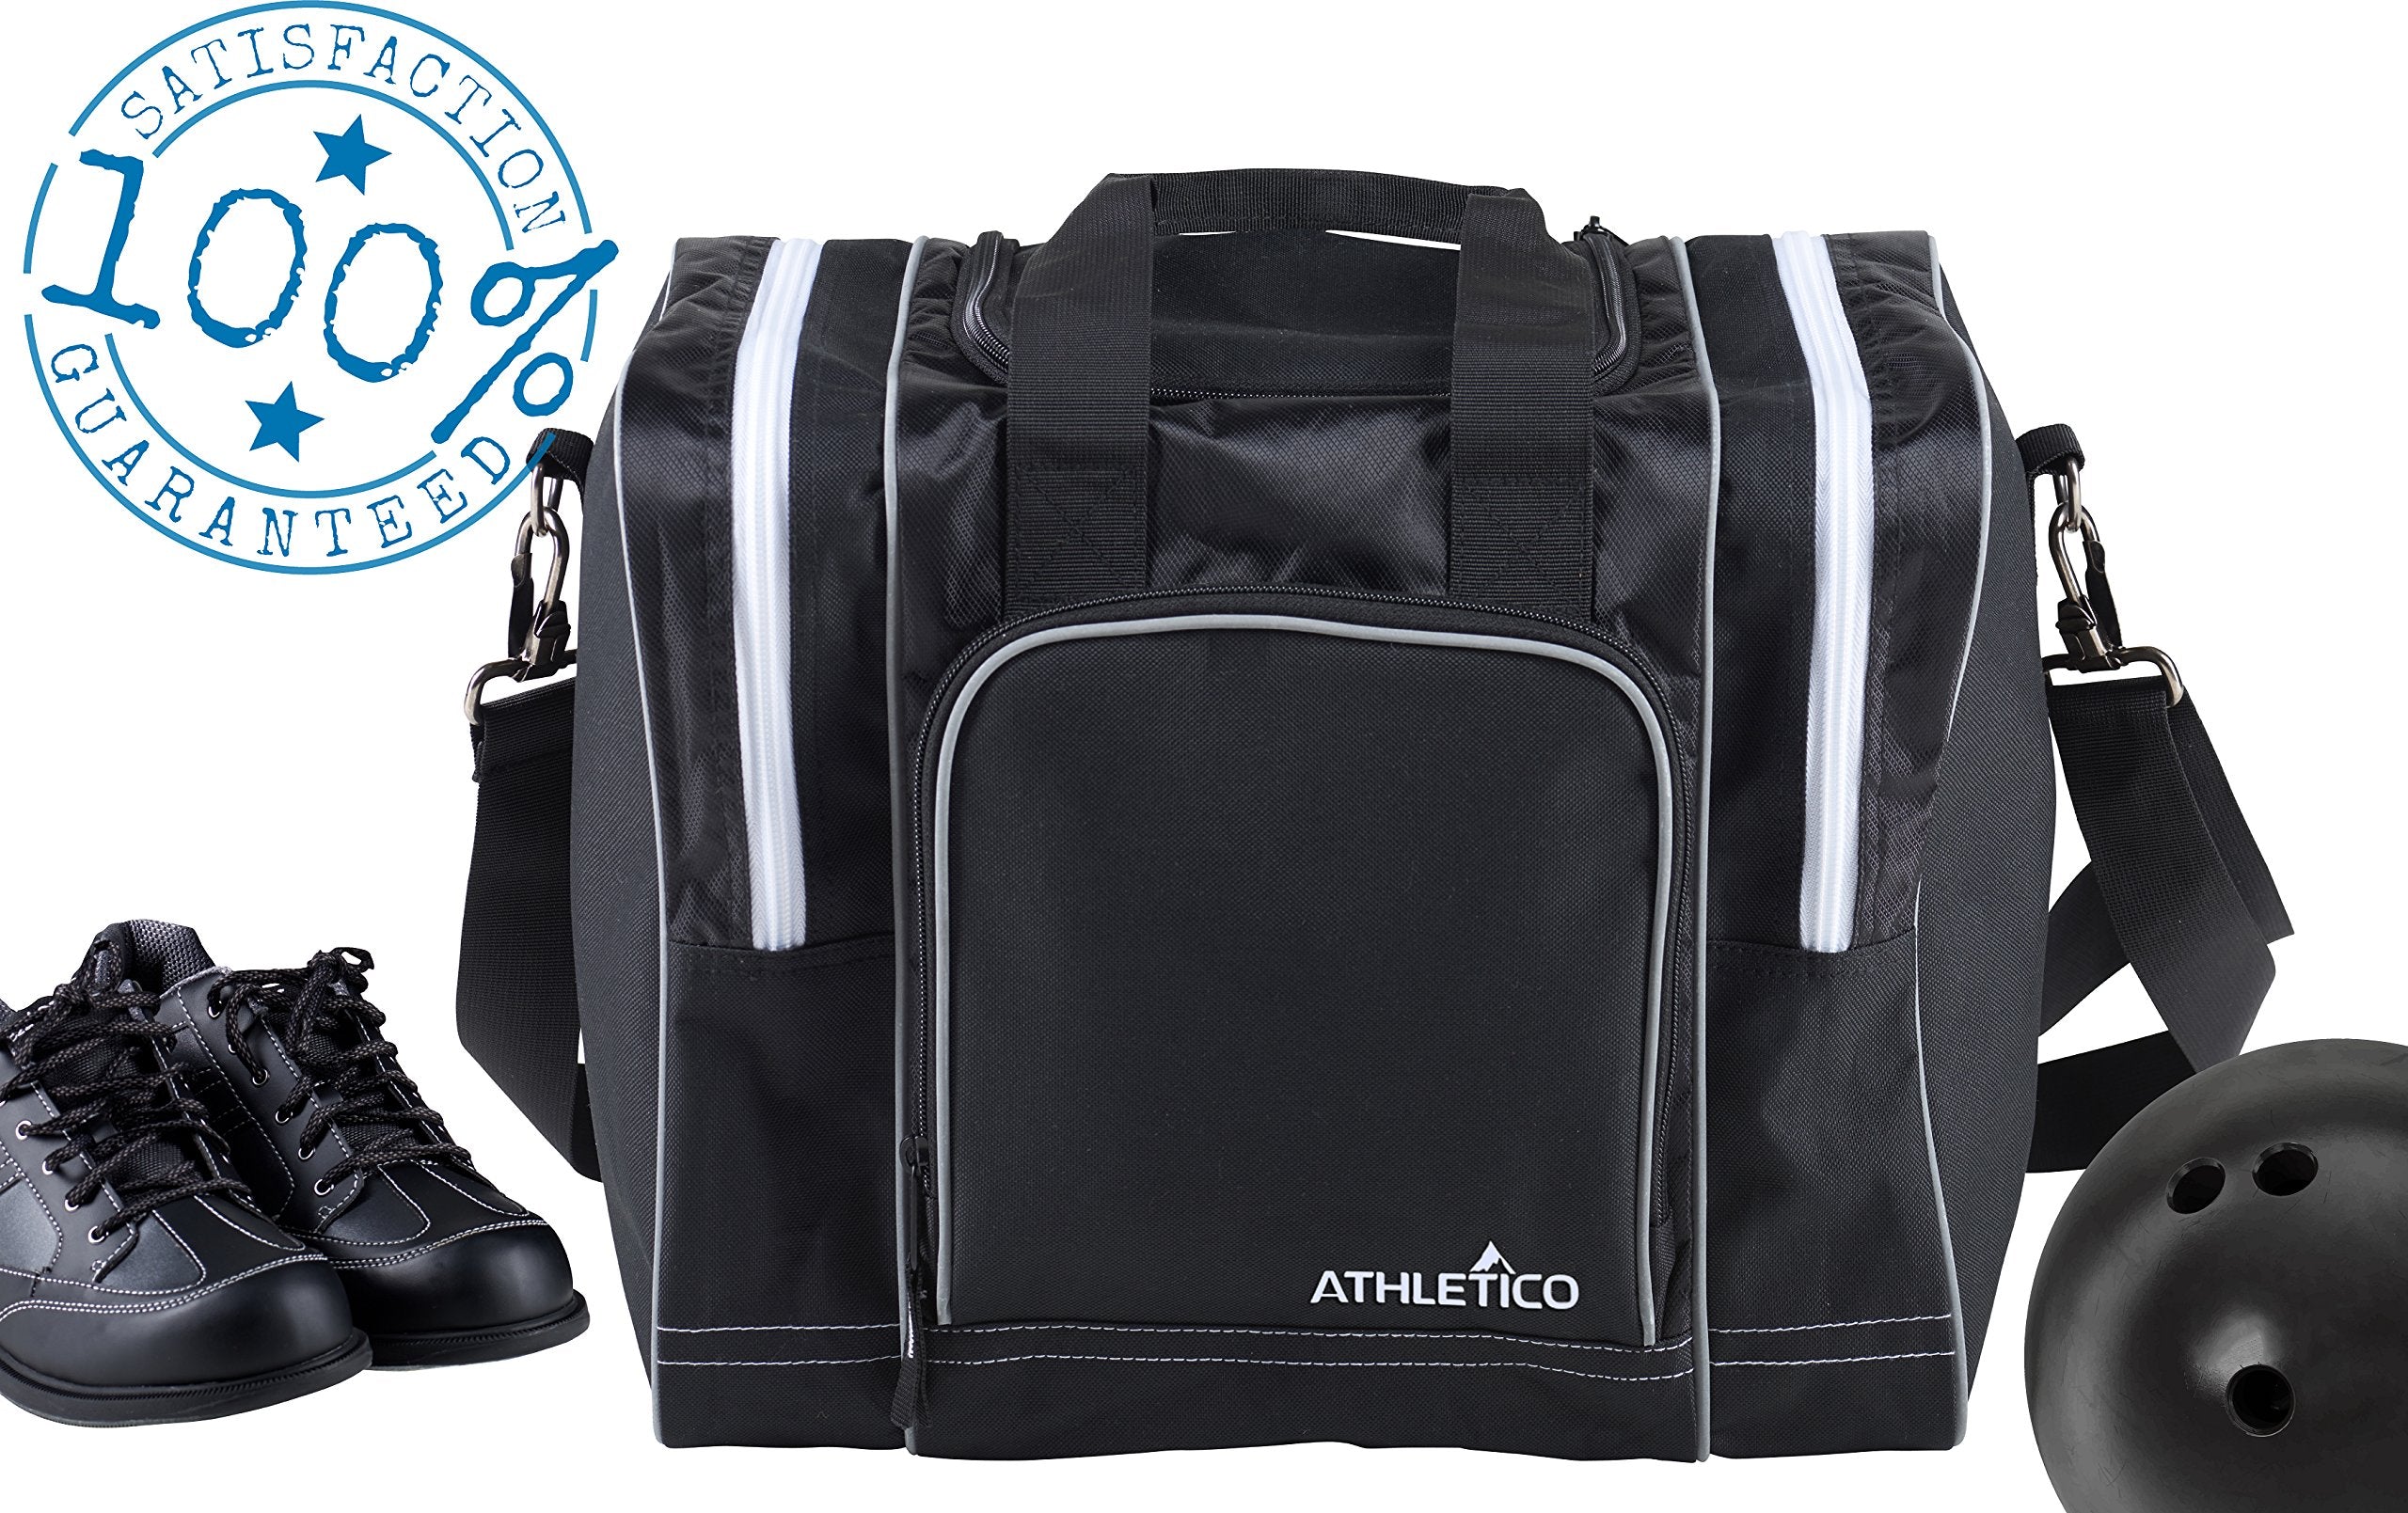 Athletico Bowling Bag for Single Ball - Single Ball Tote Bag With Padded Ball Holder - Fits a Single Pair of Bowling Shoes Up to Mens Size 14  - Good